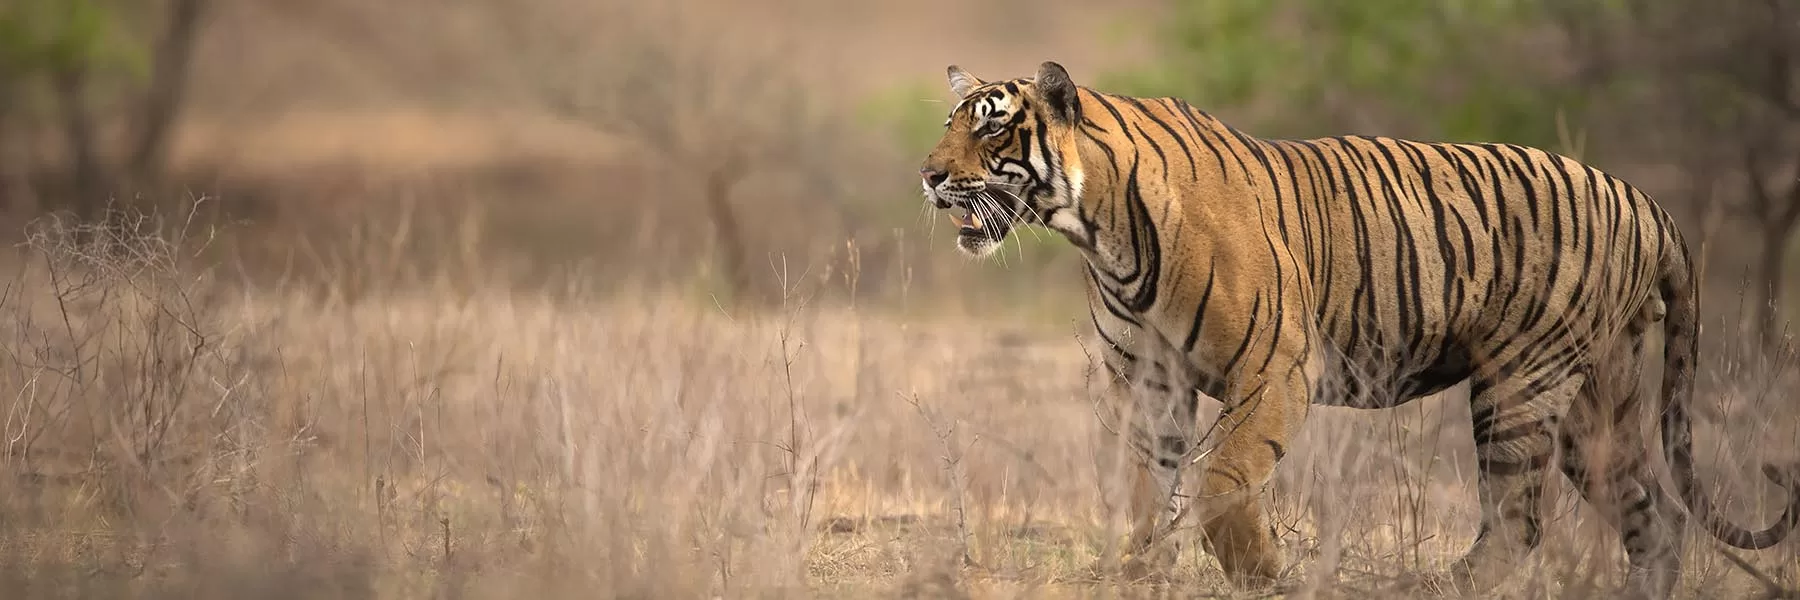 Ranthambhore Tiger Kill – A story in pictures